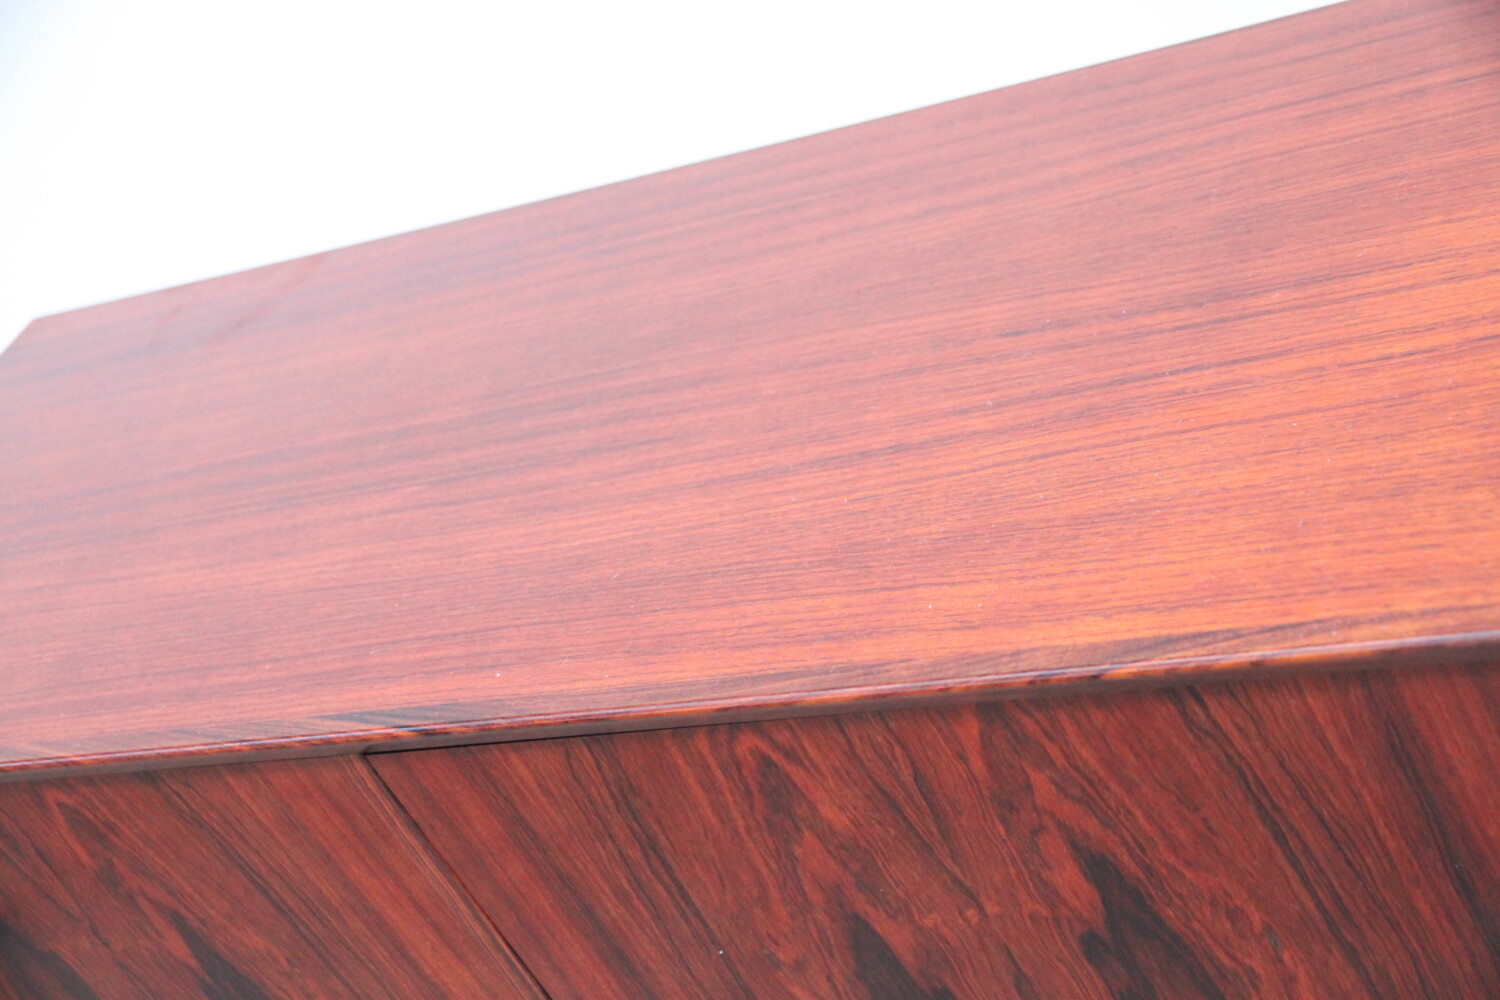 Rosewood Cabinet by Brouer